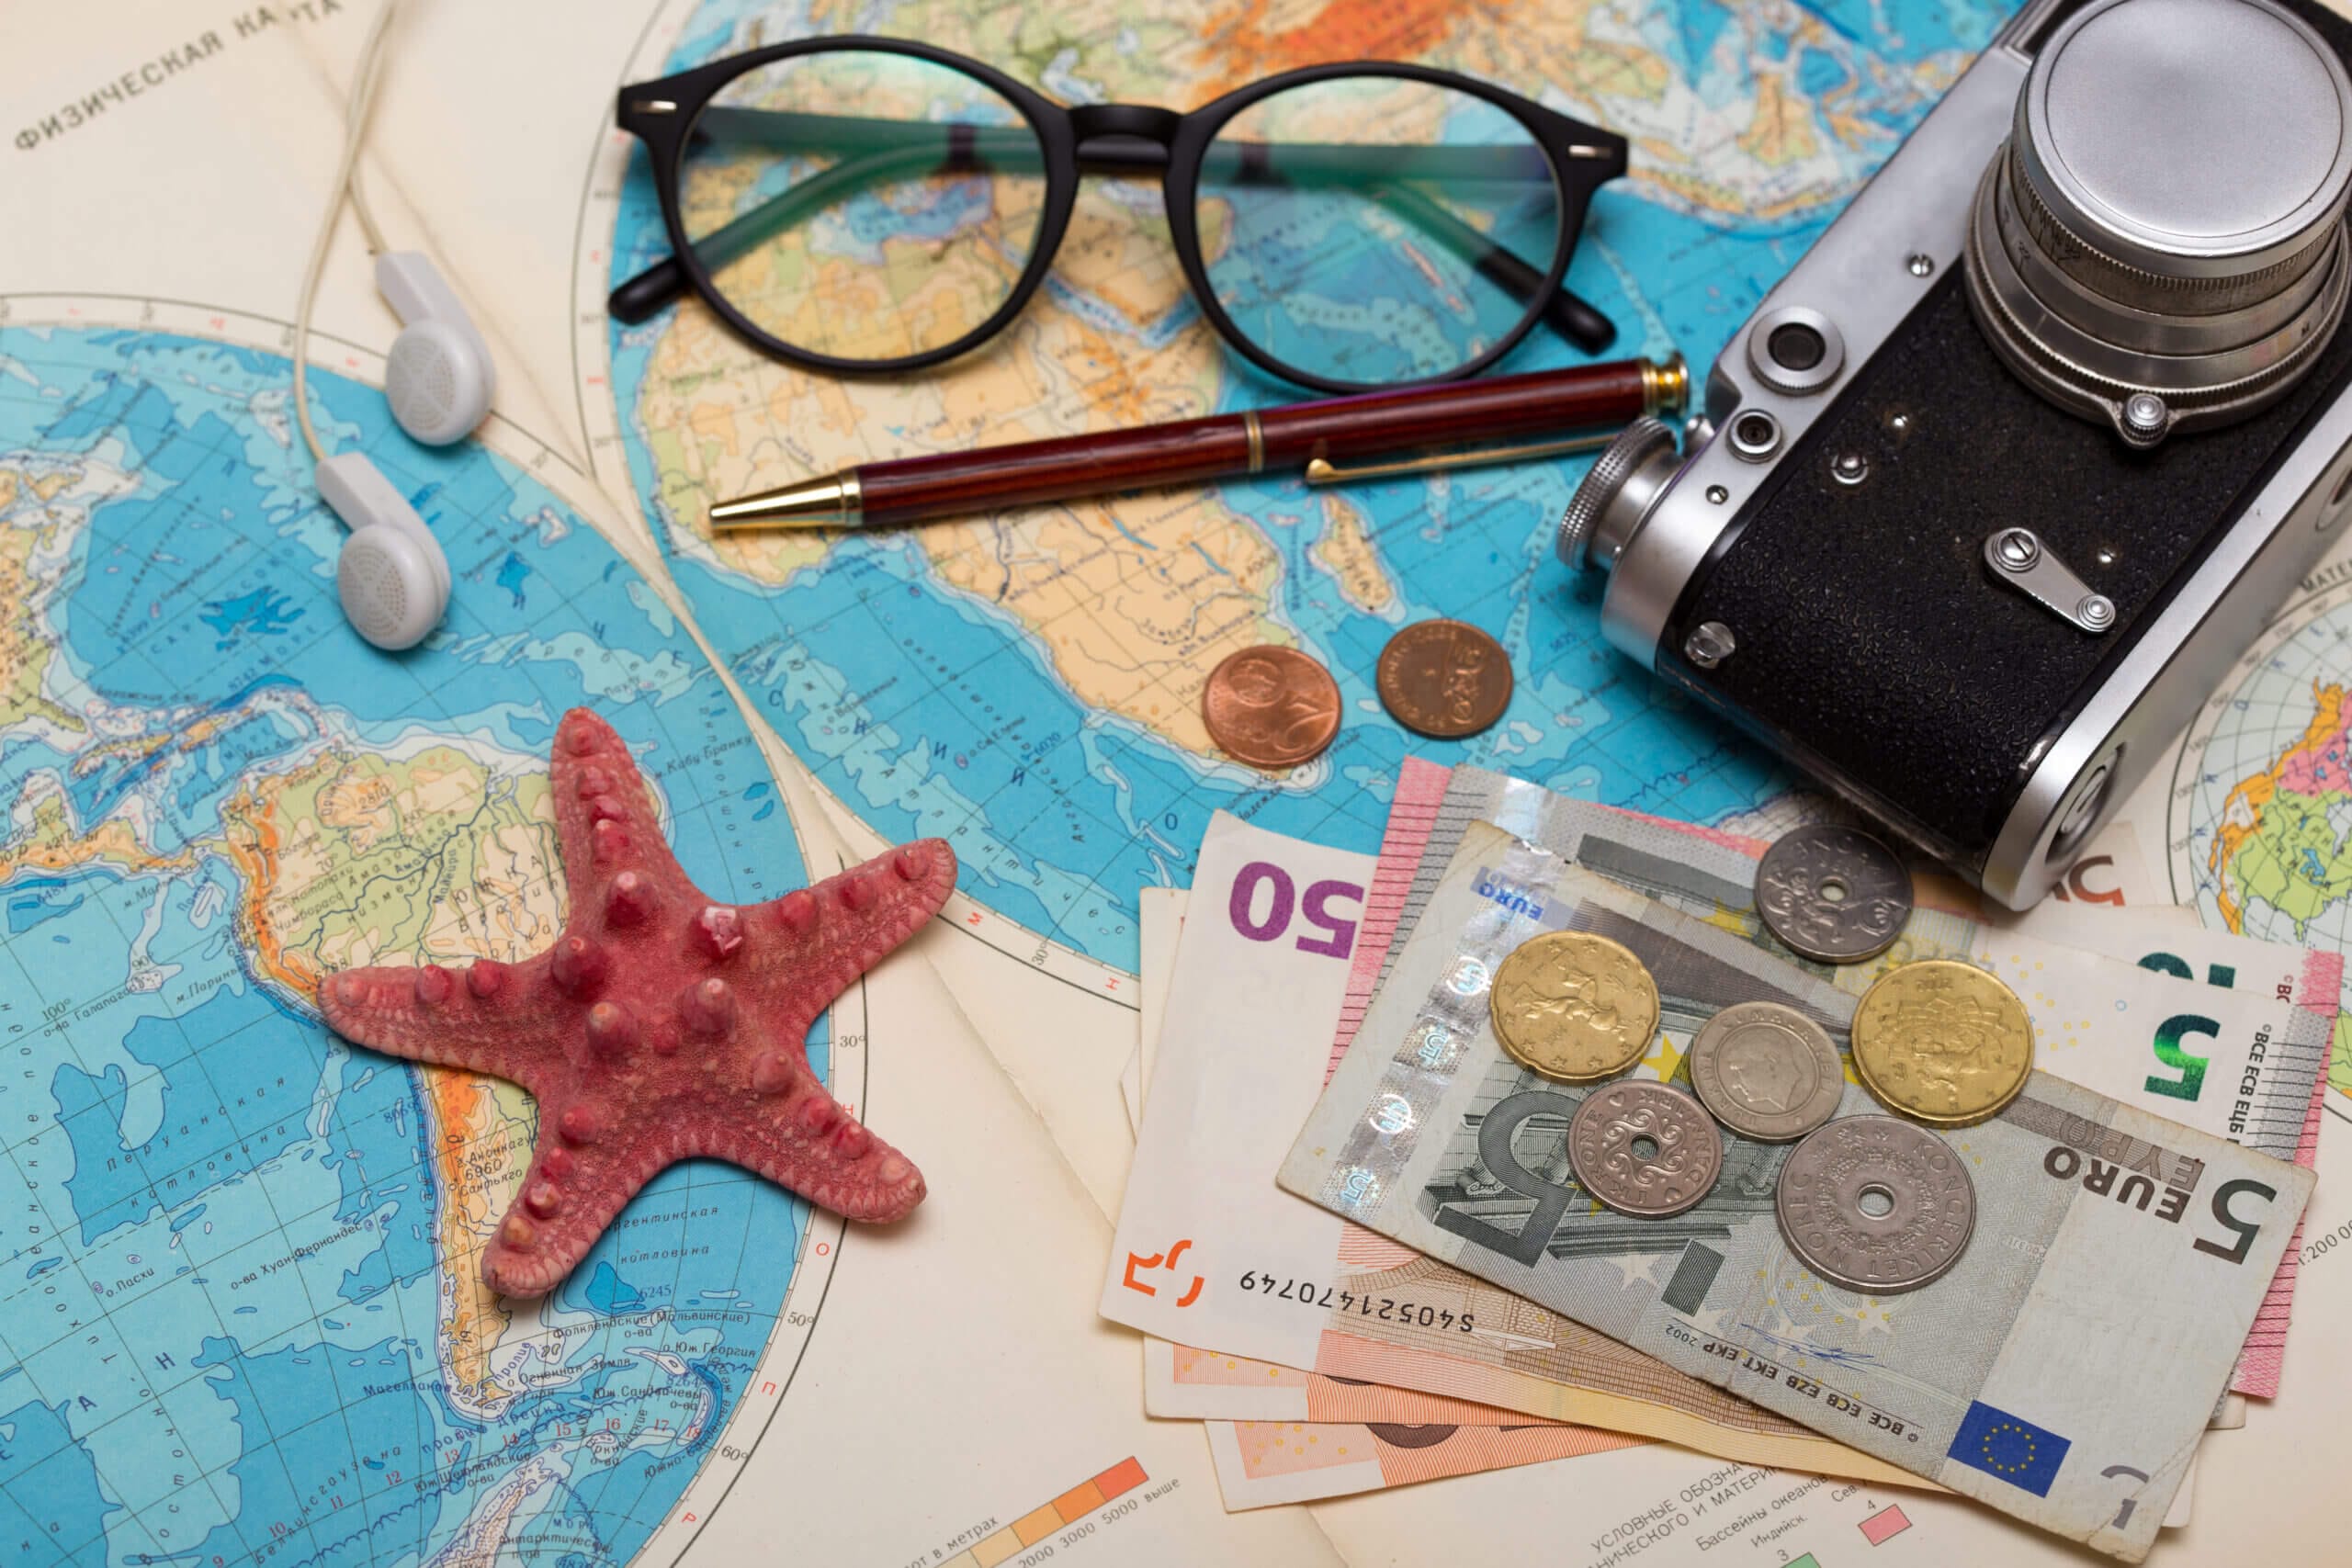 plan trip background what take trip map retro camera money sunglasses coins headphones scaled